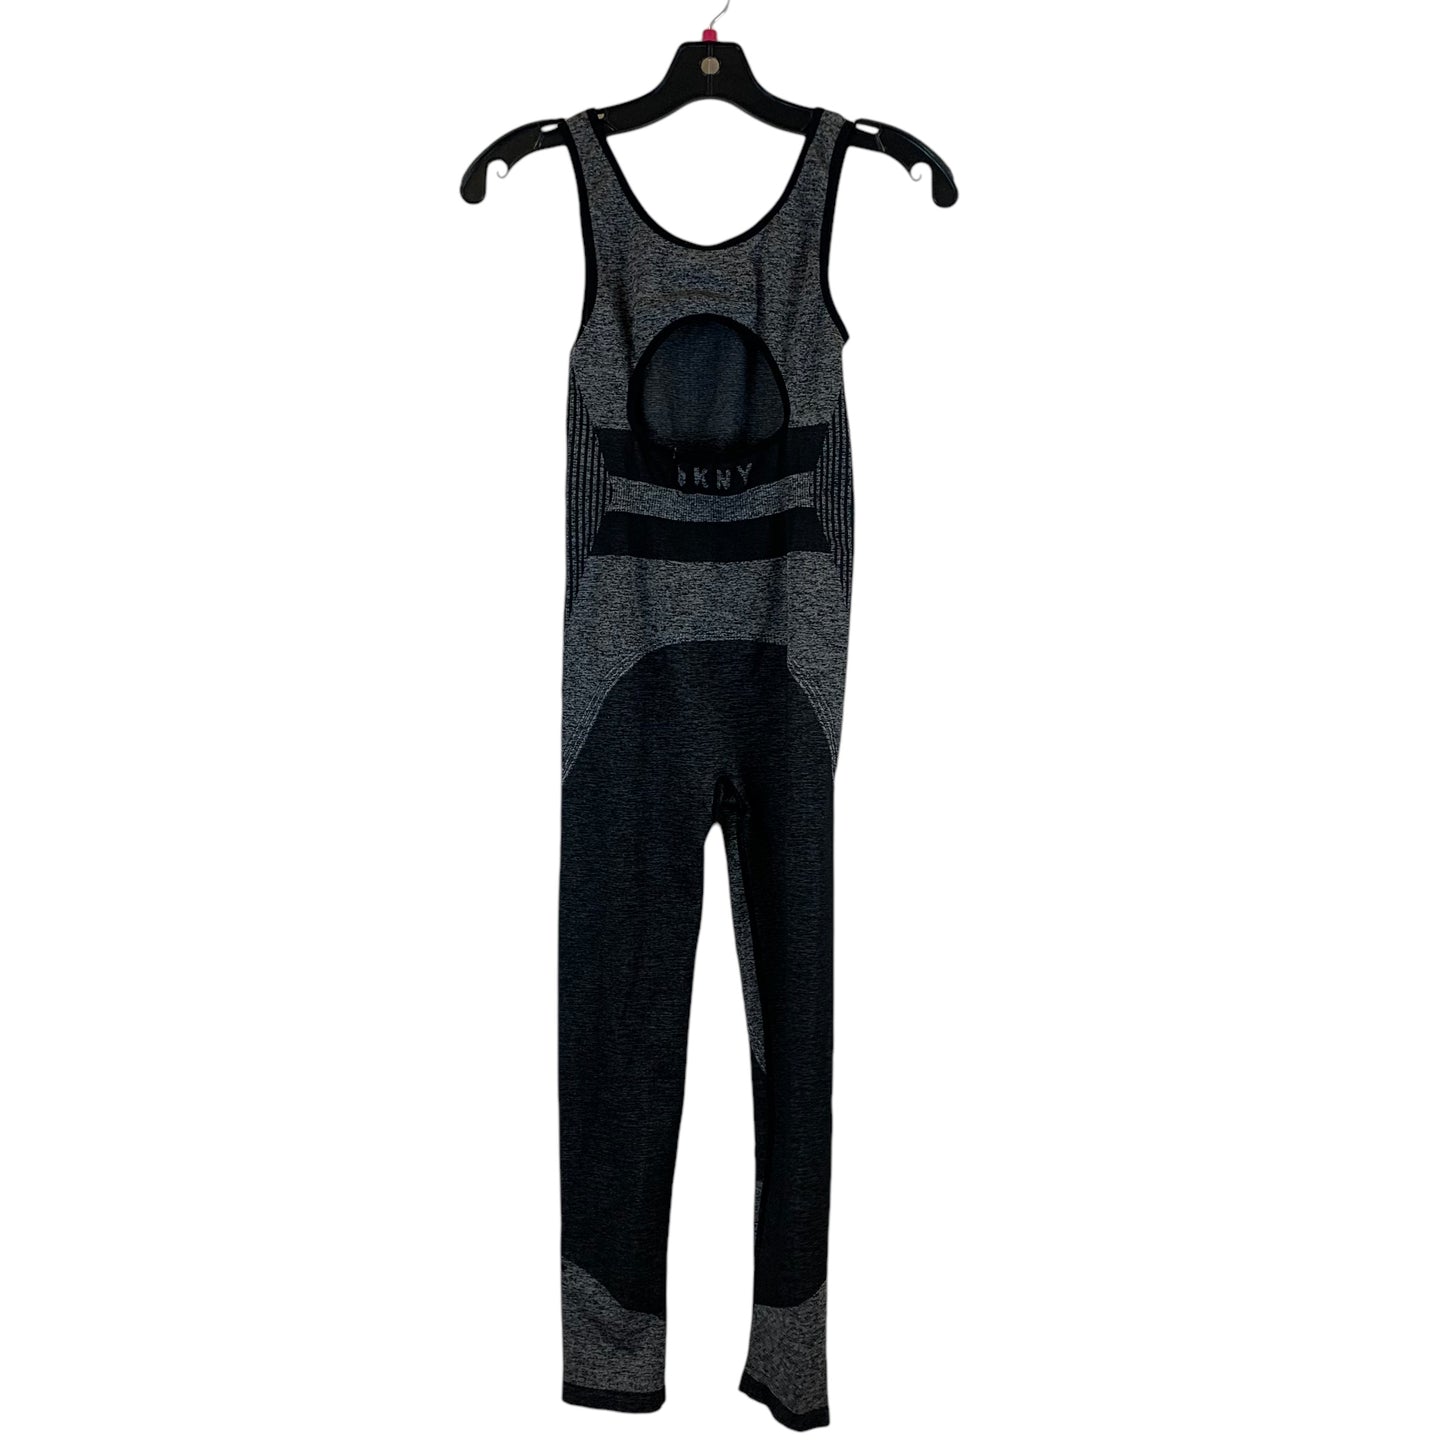 Jumpsuit By Dkny  Size: S